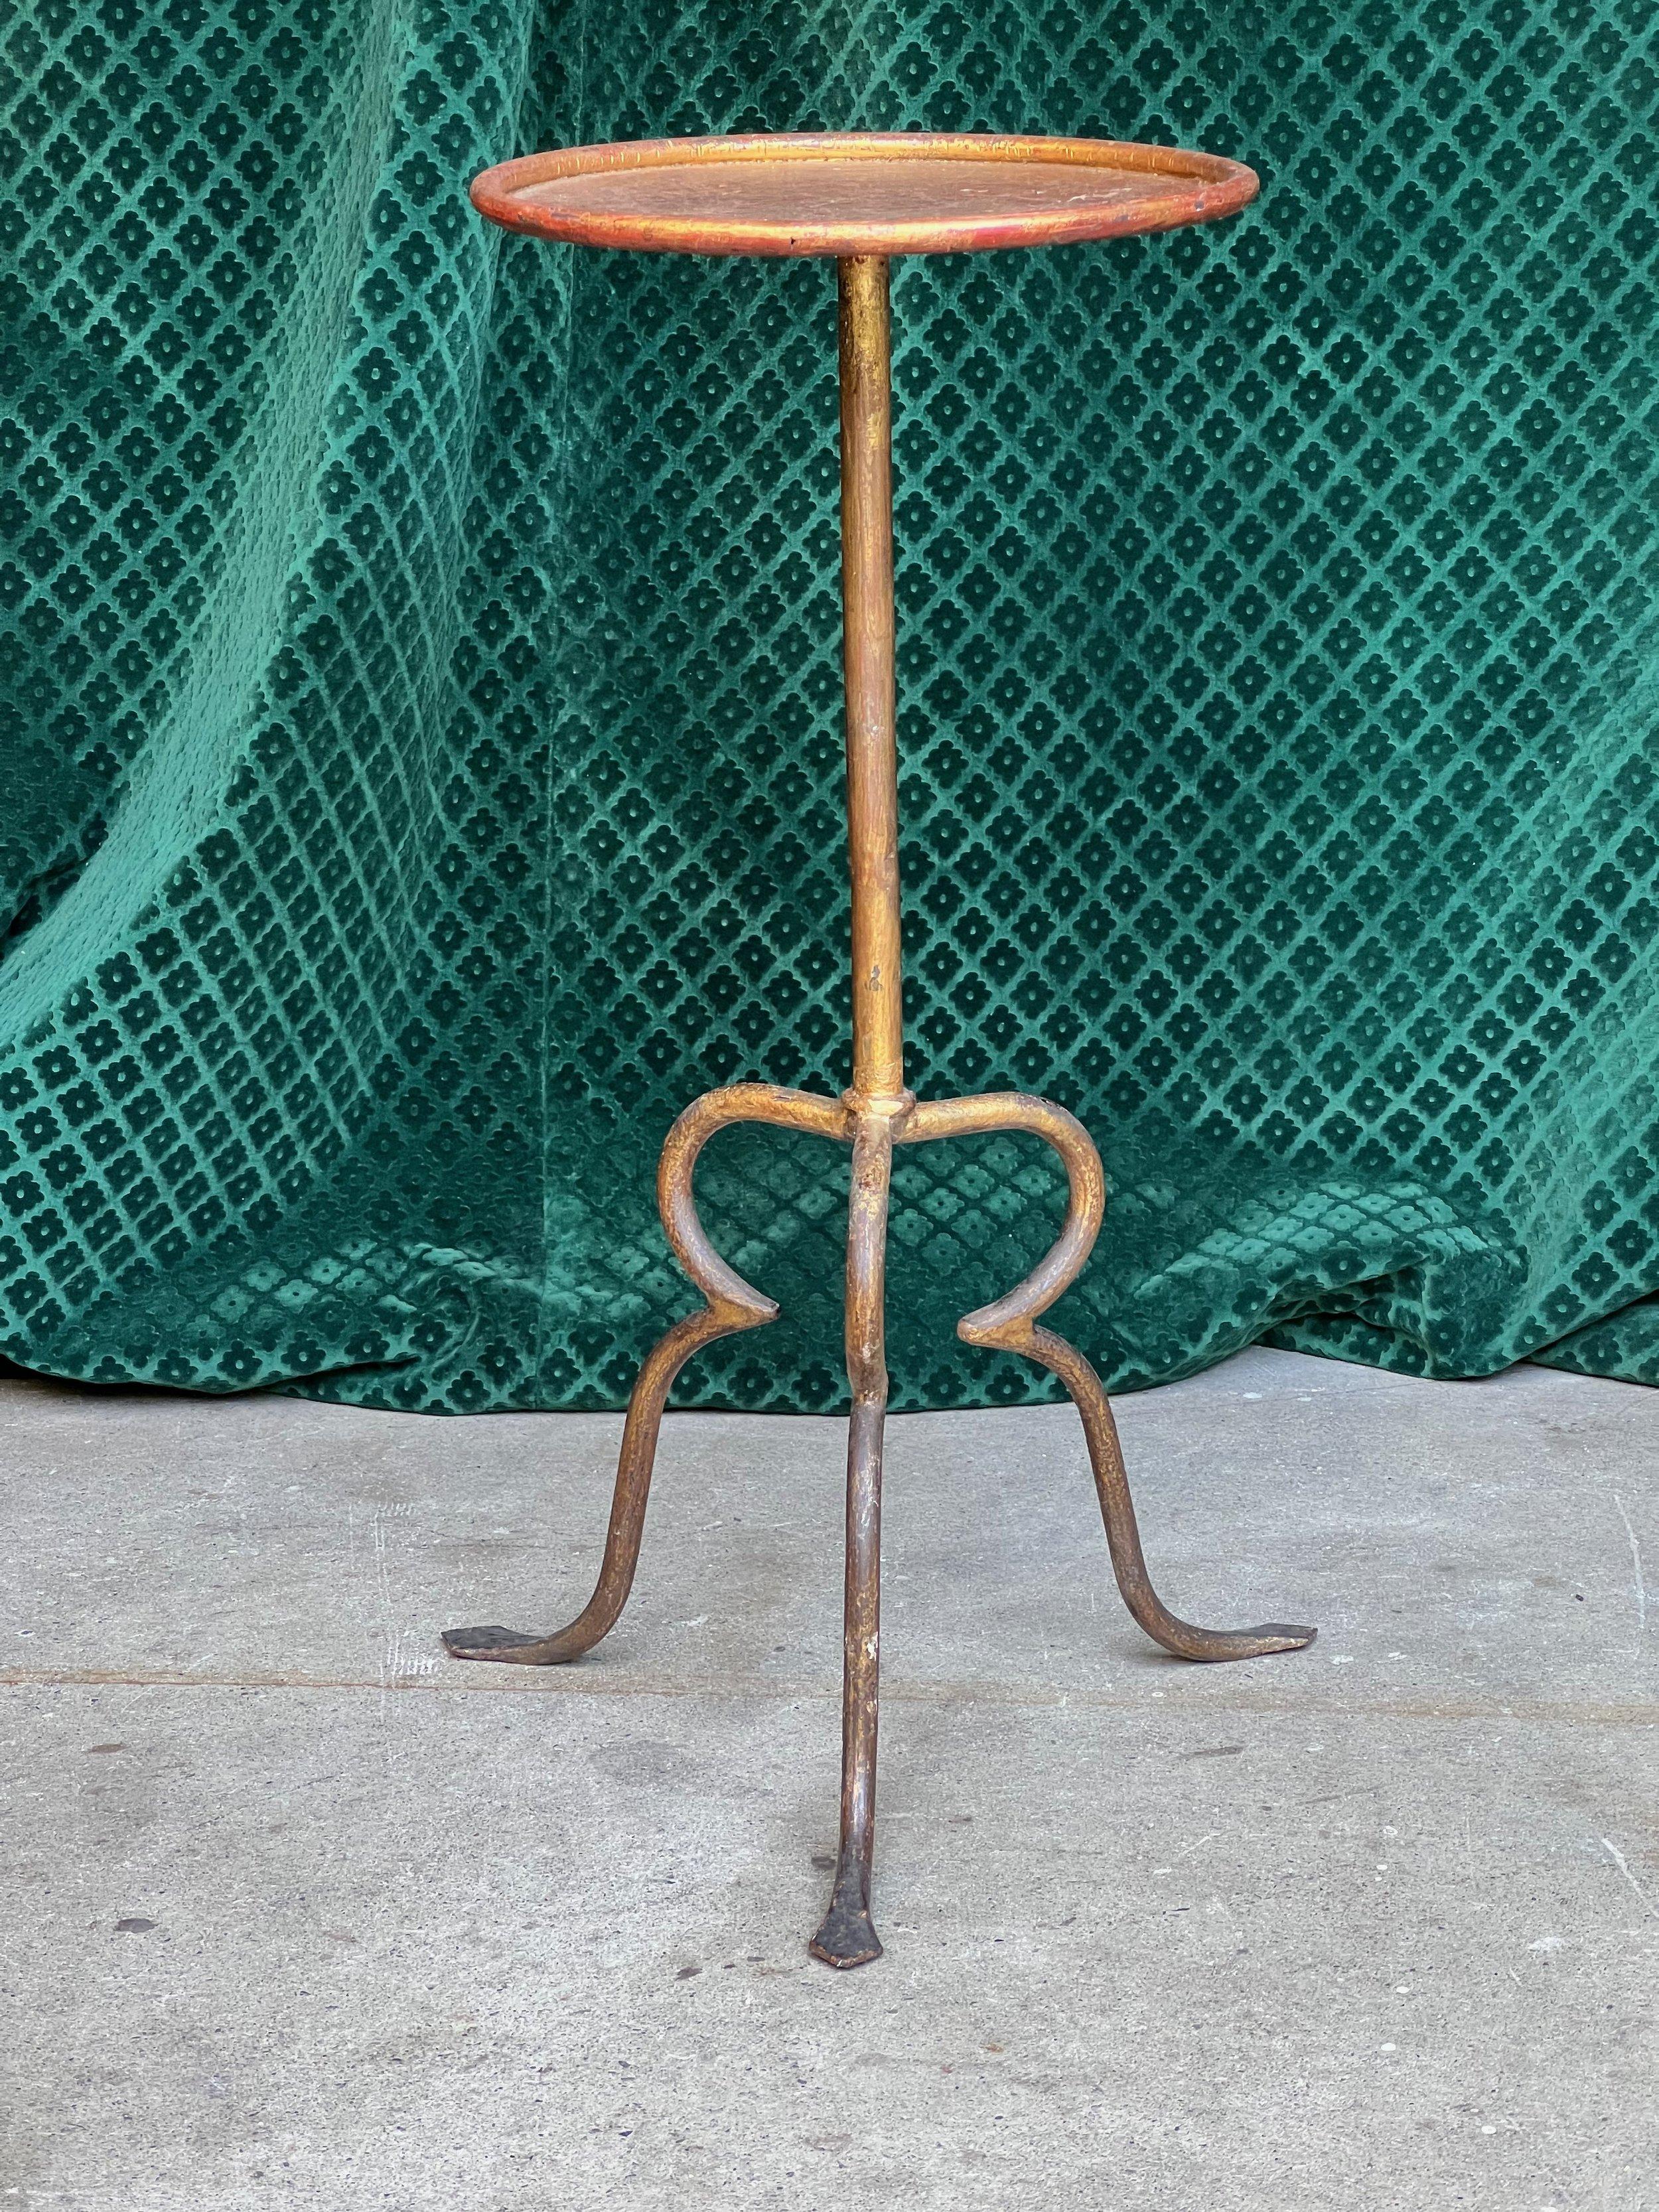 This unique drinks table, standing on a tripod base, offers an unusual yet aesthetically pleasing design. The table features an original hand-applied gold finish with darker undertones, resulting in a rich and distinctive look. The top surface,